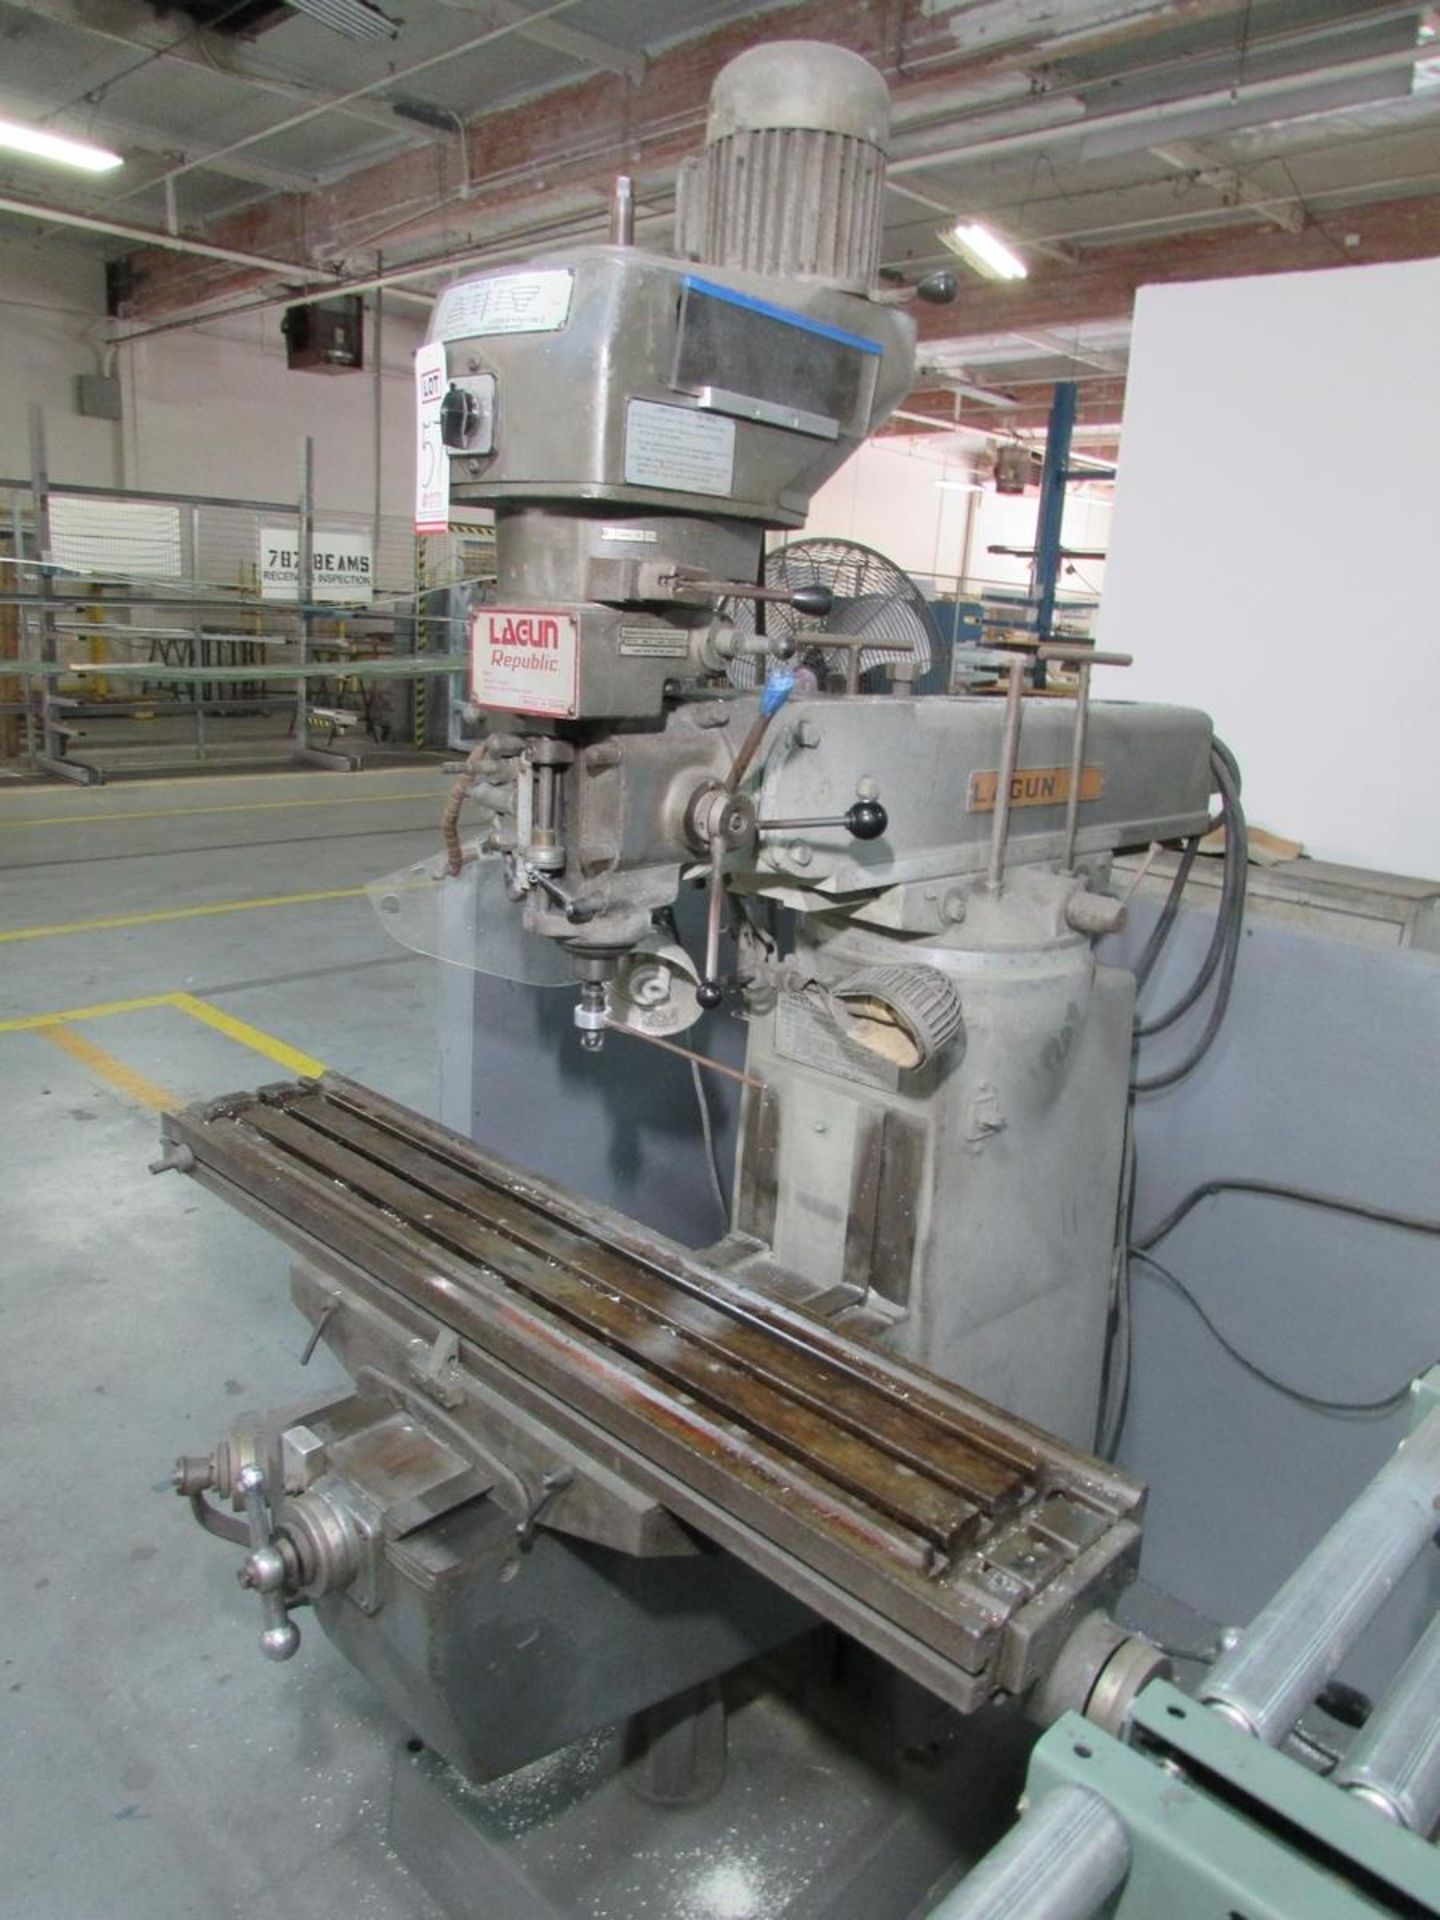 LAGUN REPUBLIC VERTICAL MILLING MACHINE, 50" X 10" T-SLOTTED TABLE, 5" QUILL STROKE, 55-2940 RPM - Image 3 of 13